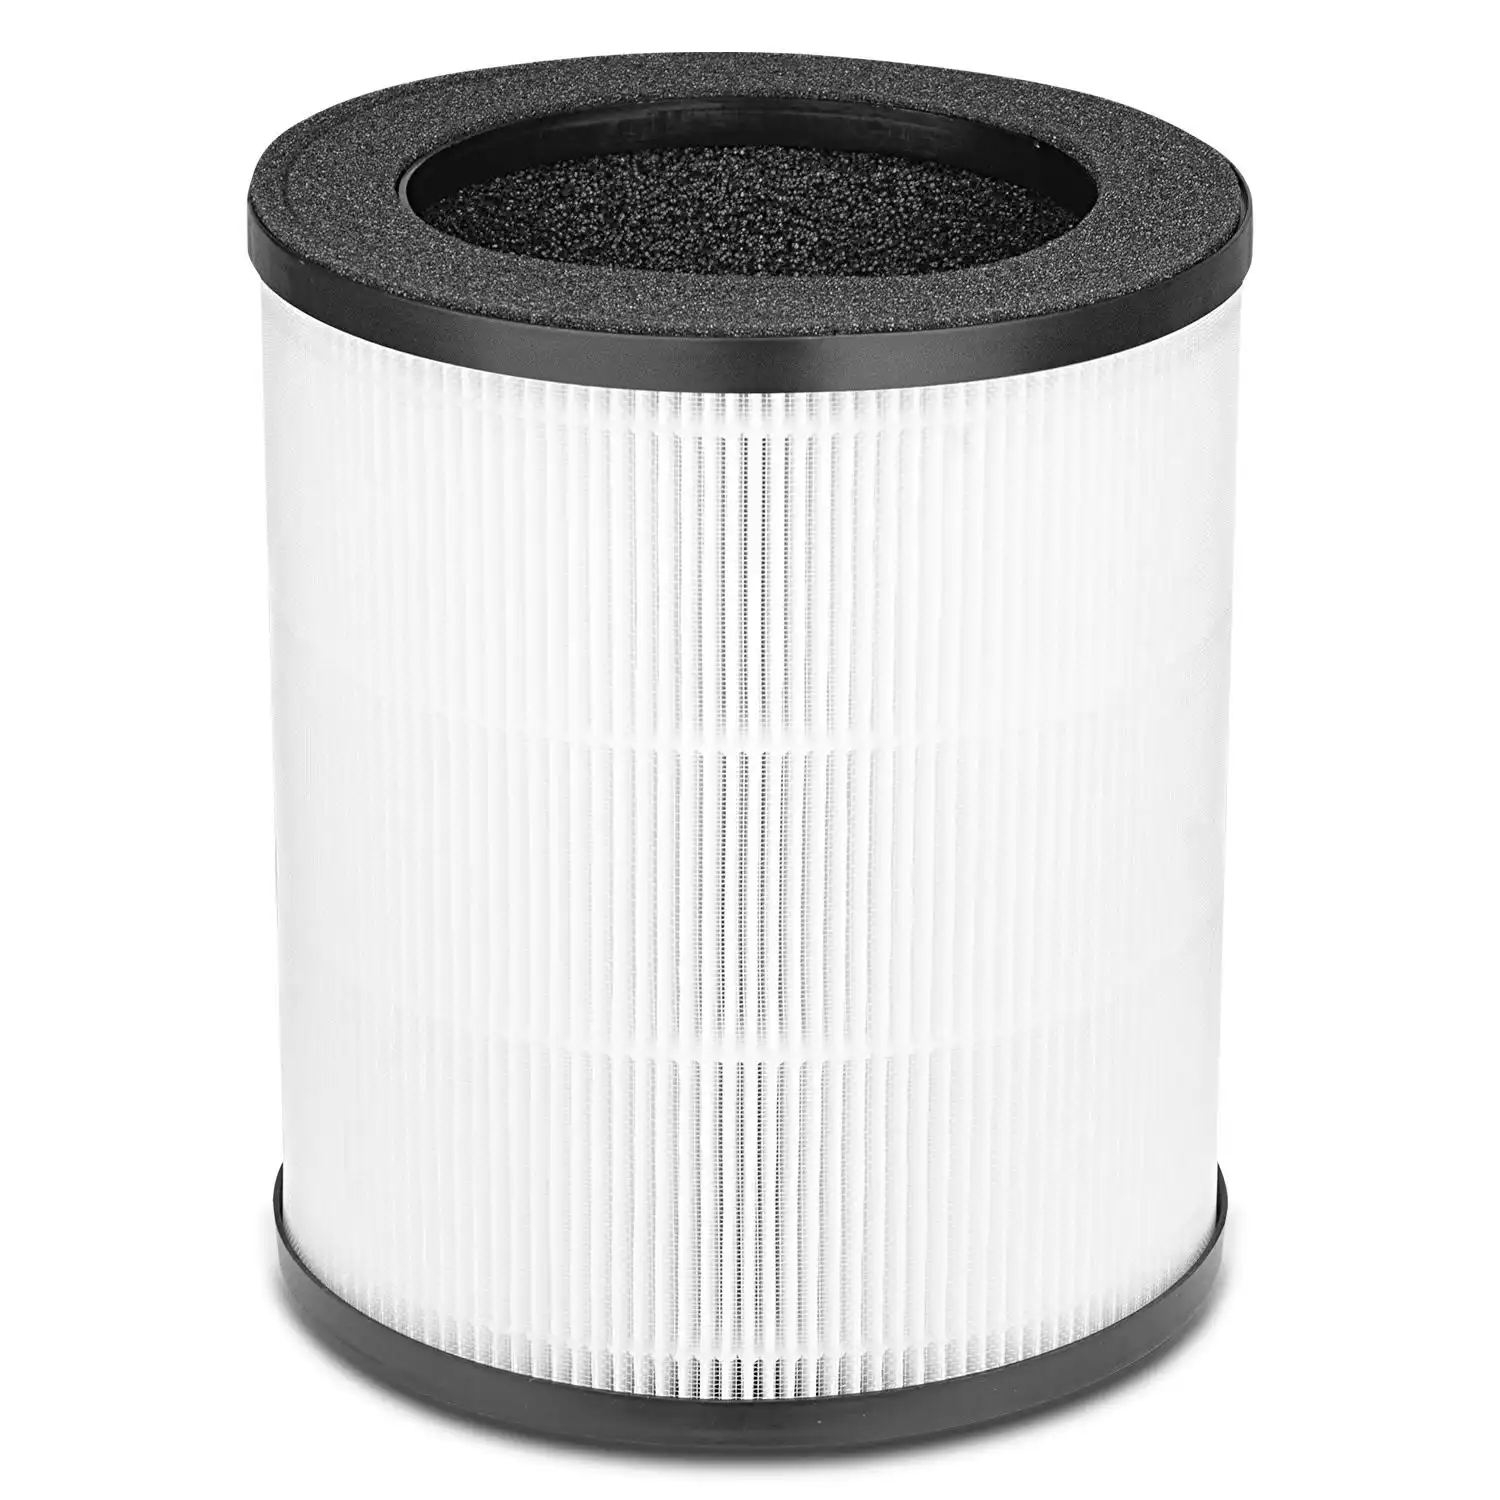 Stelive Air Purifier Filter Replacement for SL200